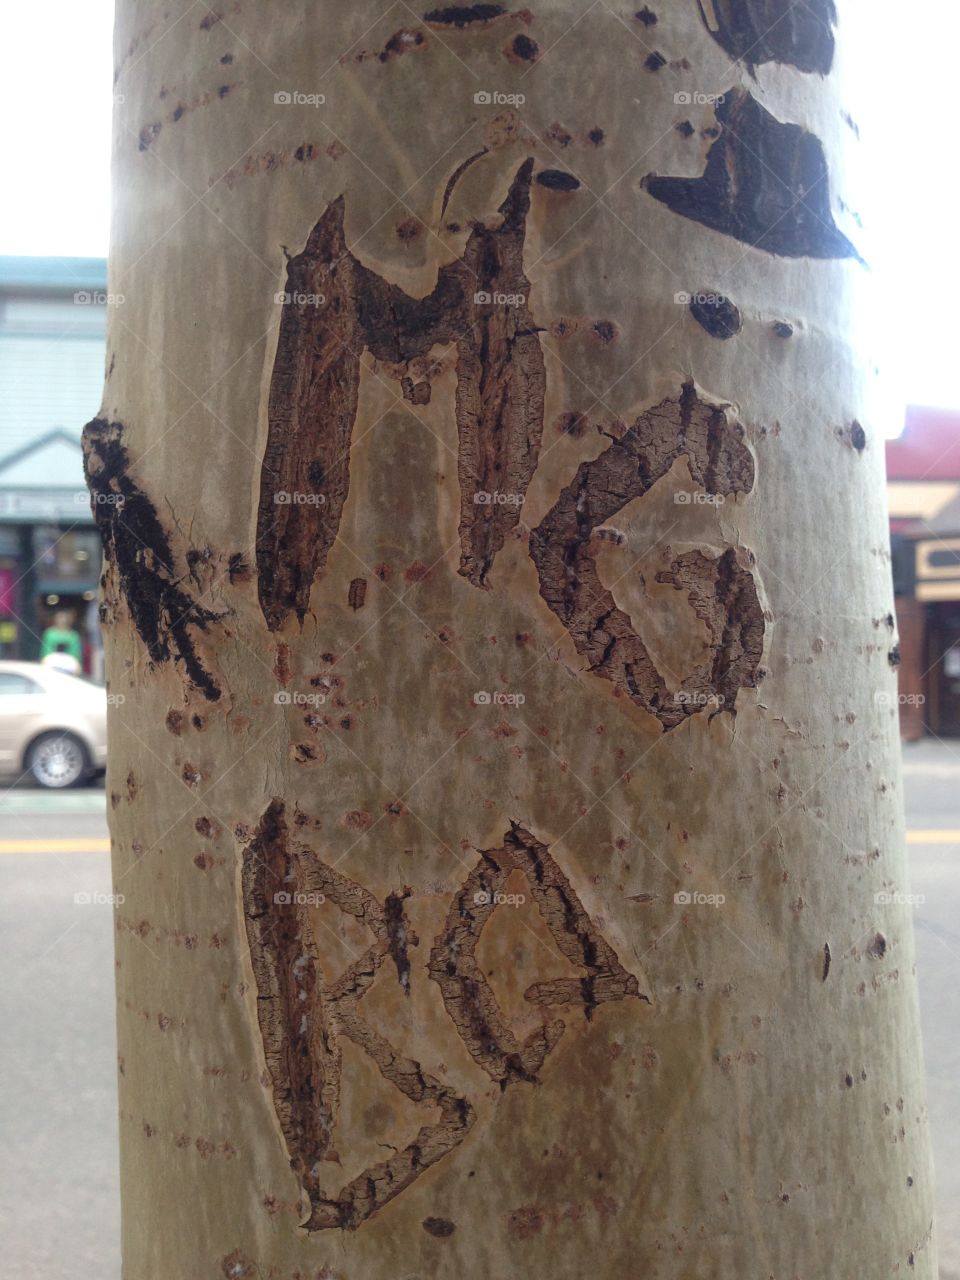 Initials carved in a tree